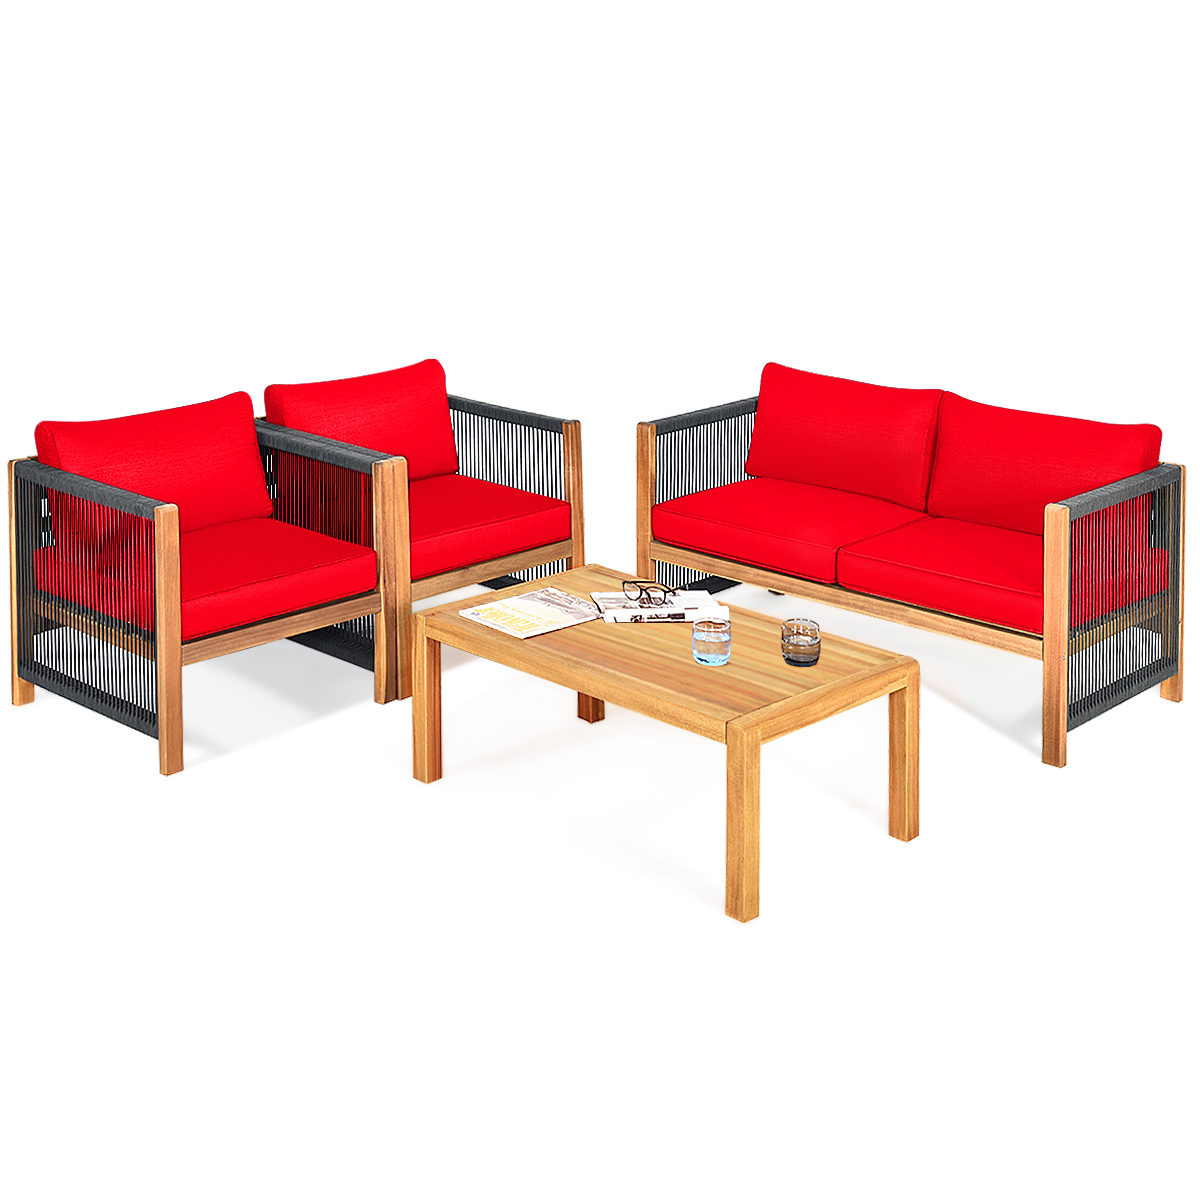 Patiojoy 4-Piece Outdoor Patio Wood Conversation Furniture Set Padded Chair with Coffee Table Red - image 4 of 4